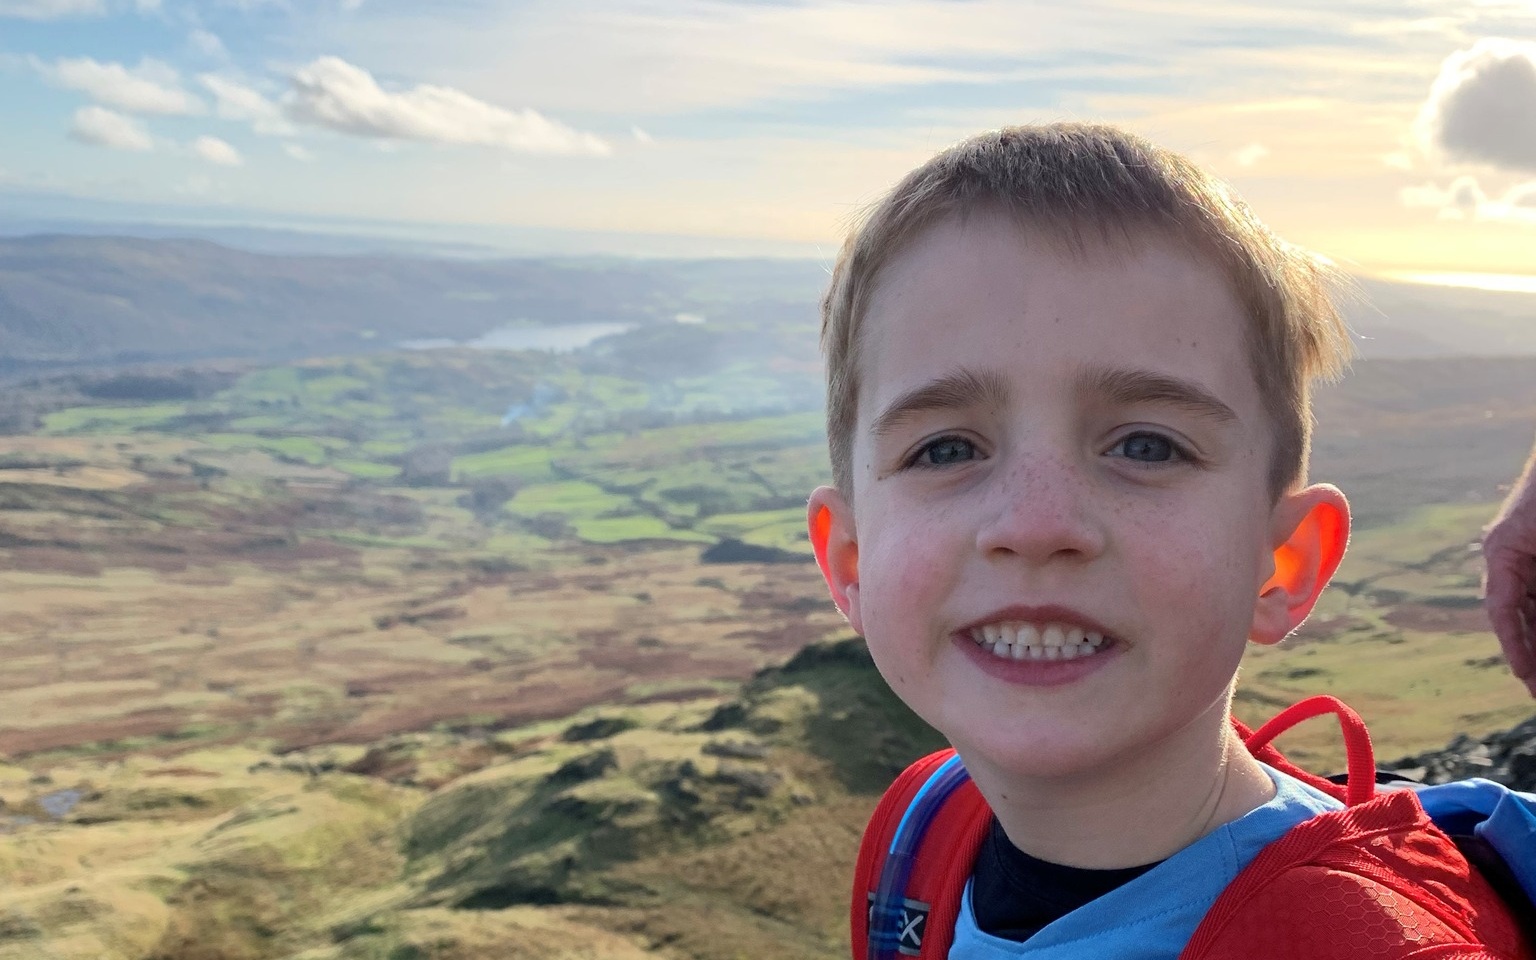 6 year old Oscar Burrow charity walk climbing equivalent of Mount Everest